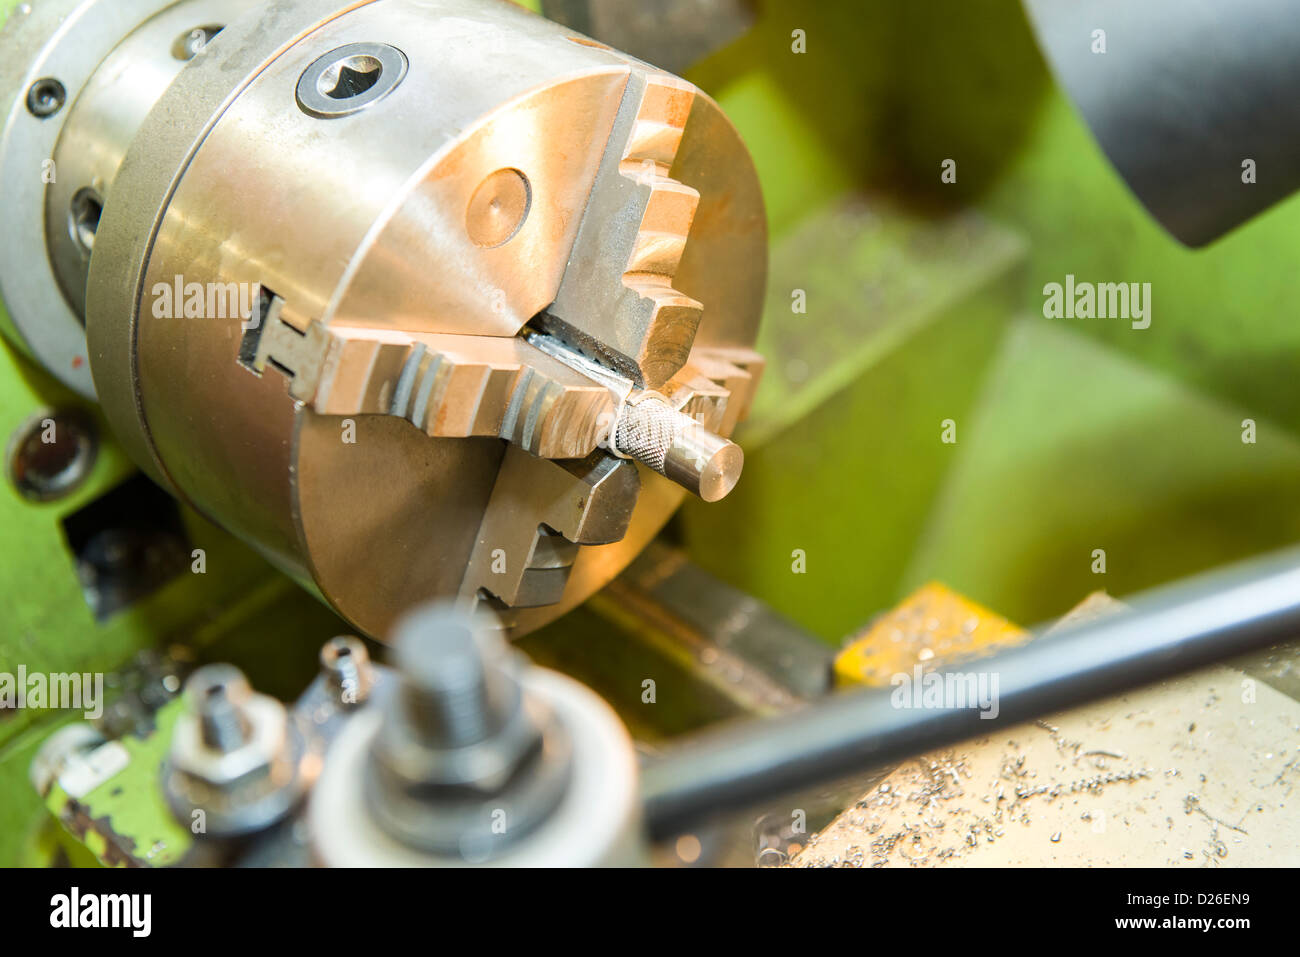 A metal part held in an industrial metal turning lathe using a four jaw chuck Stock Photo